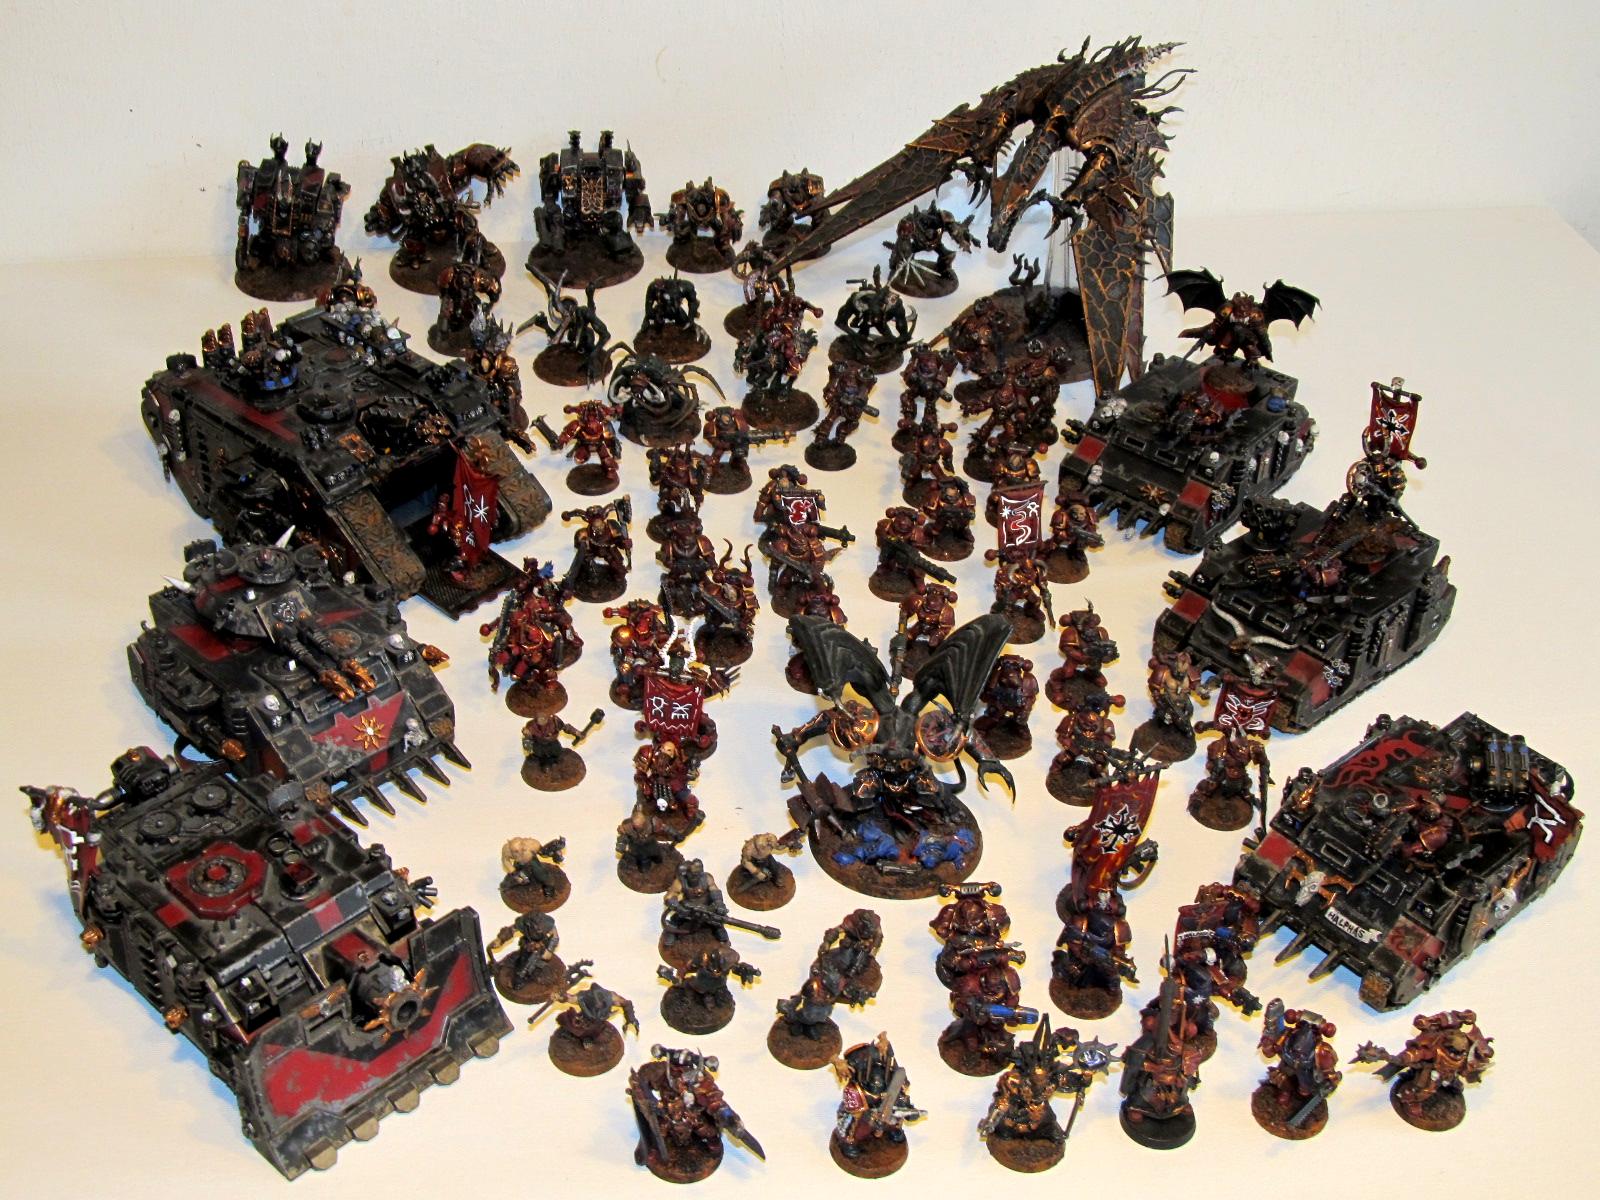 Army, Black Legion, Chaos, Chaos Space Marines, Heretix, Sons Of Halphas, Warhammer 40,000, Word Bearers